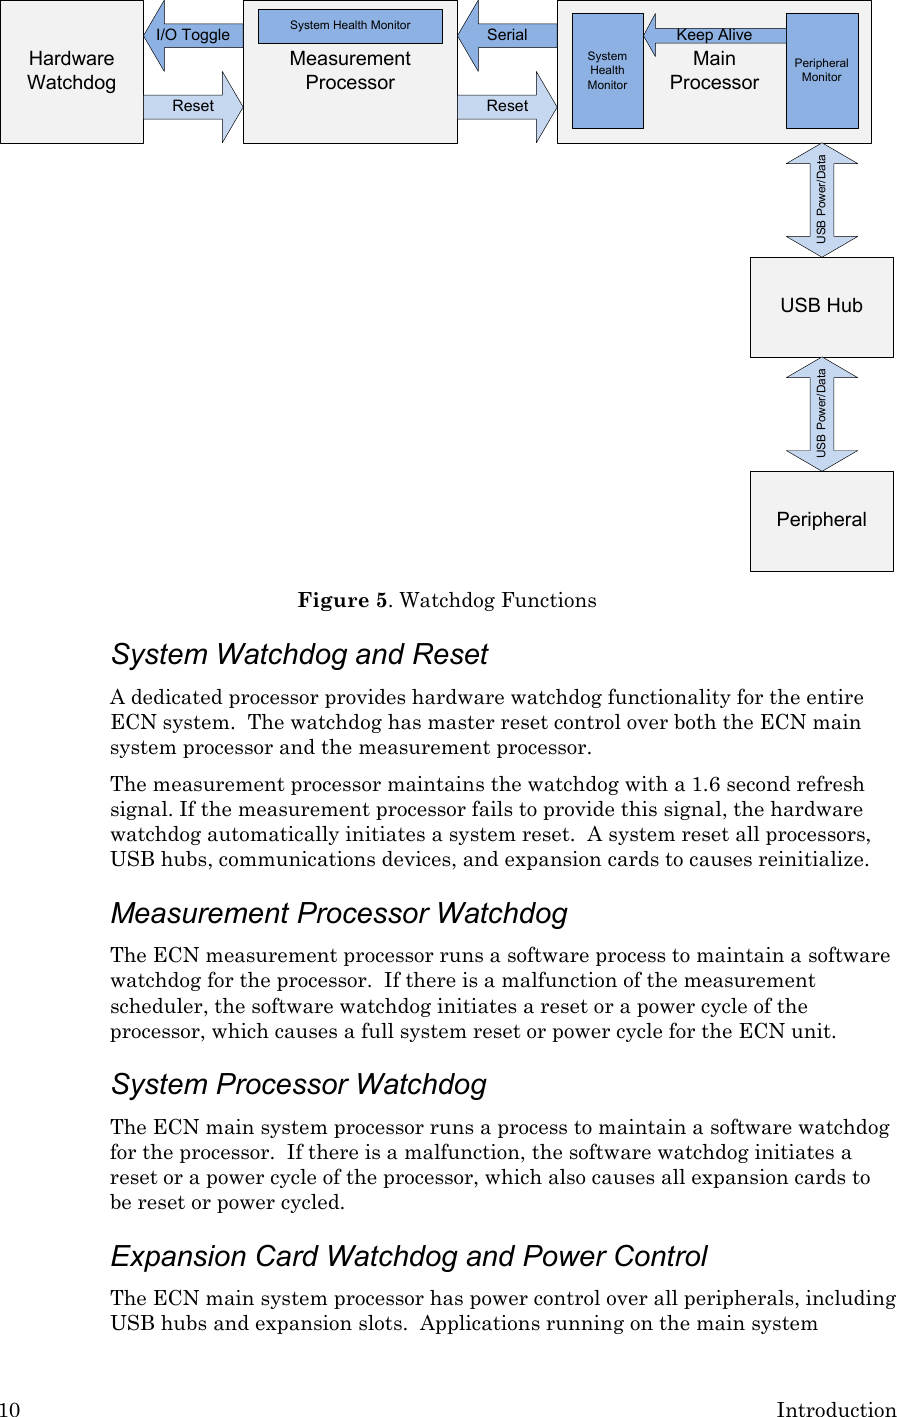 10 Introduction Hardware WatchdogMain ProcessorMeasurement ProcessorSystem Health MonitorSystem Health MonitorPeripheral MonitorUSB Power/DataI/O Toggle SerialReset ResetKeep AliveUSB HubUSB Power/DataPeripheral Figure 5. Watchdog Functions System Watchdog and Reset A dedicated processor provides hardware watchdog functionality for the entire ECN system.  The watchdog has master reset control over both the ECN main system processor and the measurement processor.  The measurement processor maintains the watchdog with a 1.6 second refresh signal. If the measurement processor fails to provide this signal, the hardware watchdog automatically initiates a system reset.  A system reset all processors, USB hubs, communications devices, and expansion cards to causes reinitialize. Measurement Processor Watchdog  The ECN measurement processor runs a software process to maintain a software watchdog for the processor.  If there is a malfunction of the measurement scheduler, the software watchdog initiates a reset or a power cycle of the processor, which causes a full system reset or power cycle for the ECN unit. System Processor Watchdog  The ECN main system processor runs a process to maintain a software watchdog for the processor.  If there is a malfunction, the software watchdog initiates a reset or a power cycle of the processor, which also causes all expansion cards to be reset or power cycled. Expansion Card Watchdog and Power Control The ECN main system processor has power control over all peripherals, including USB hubs and expansion slots.  Applications running on the main system 